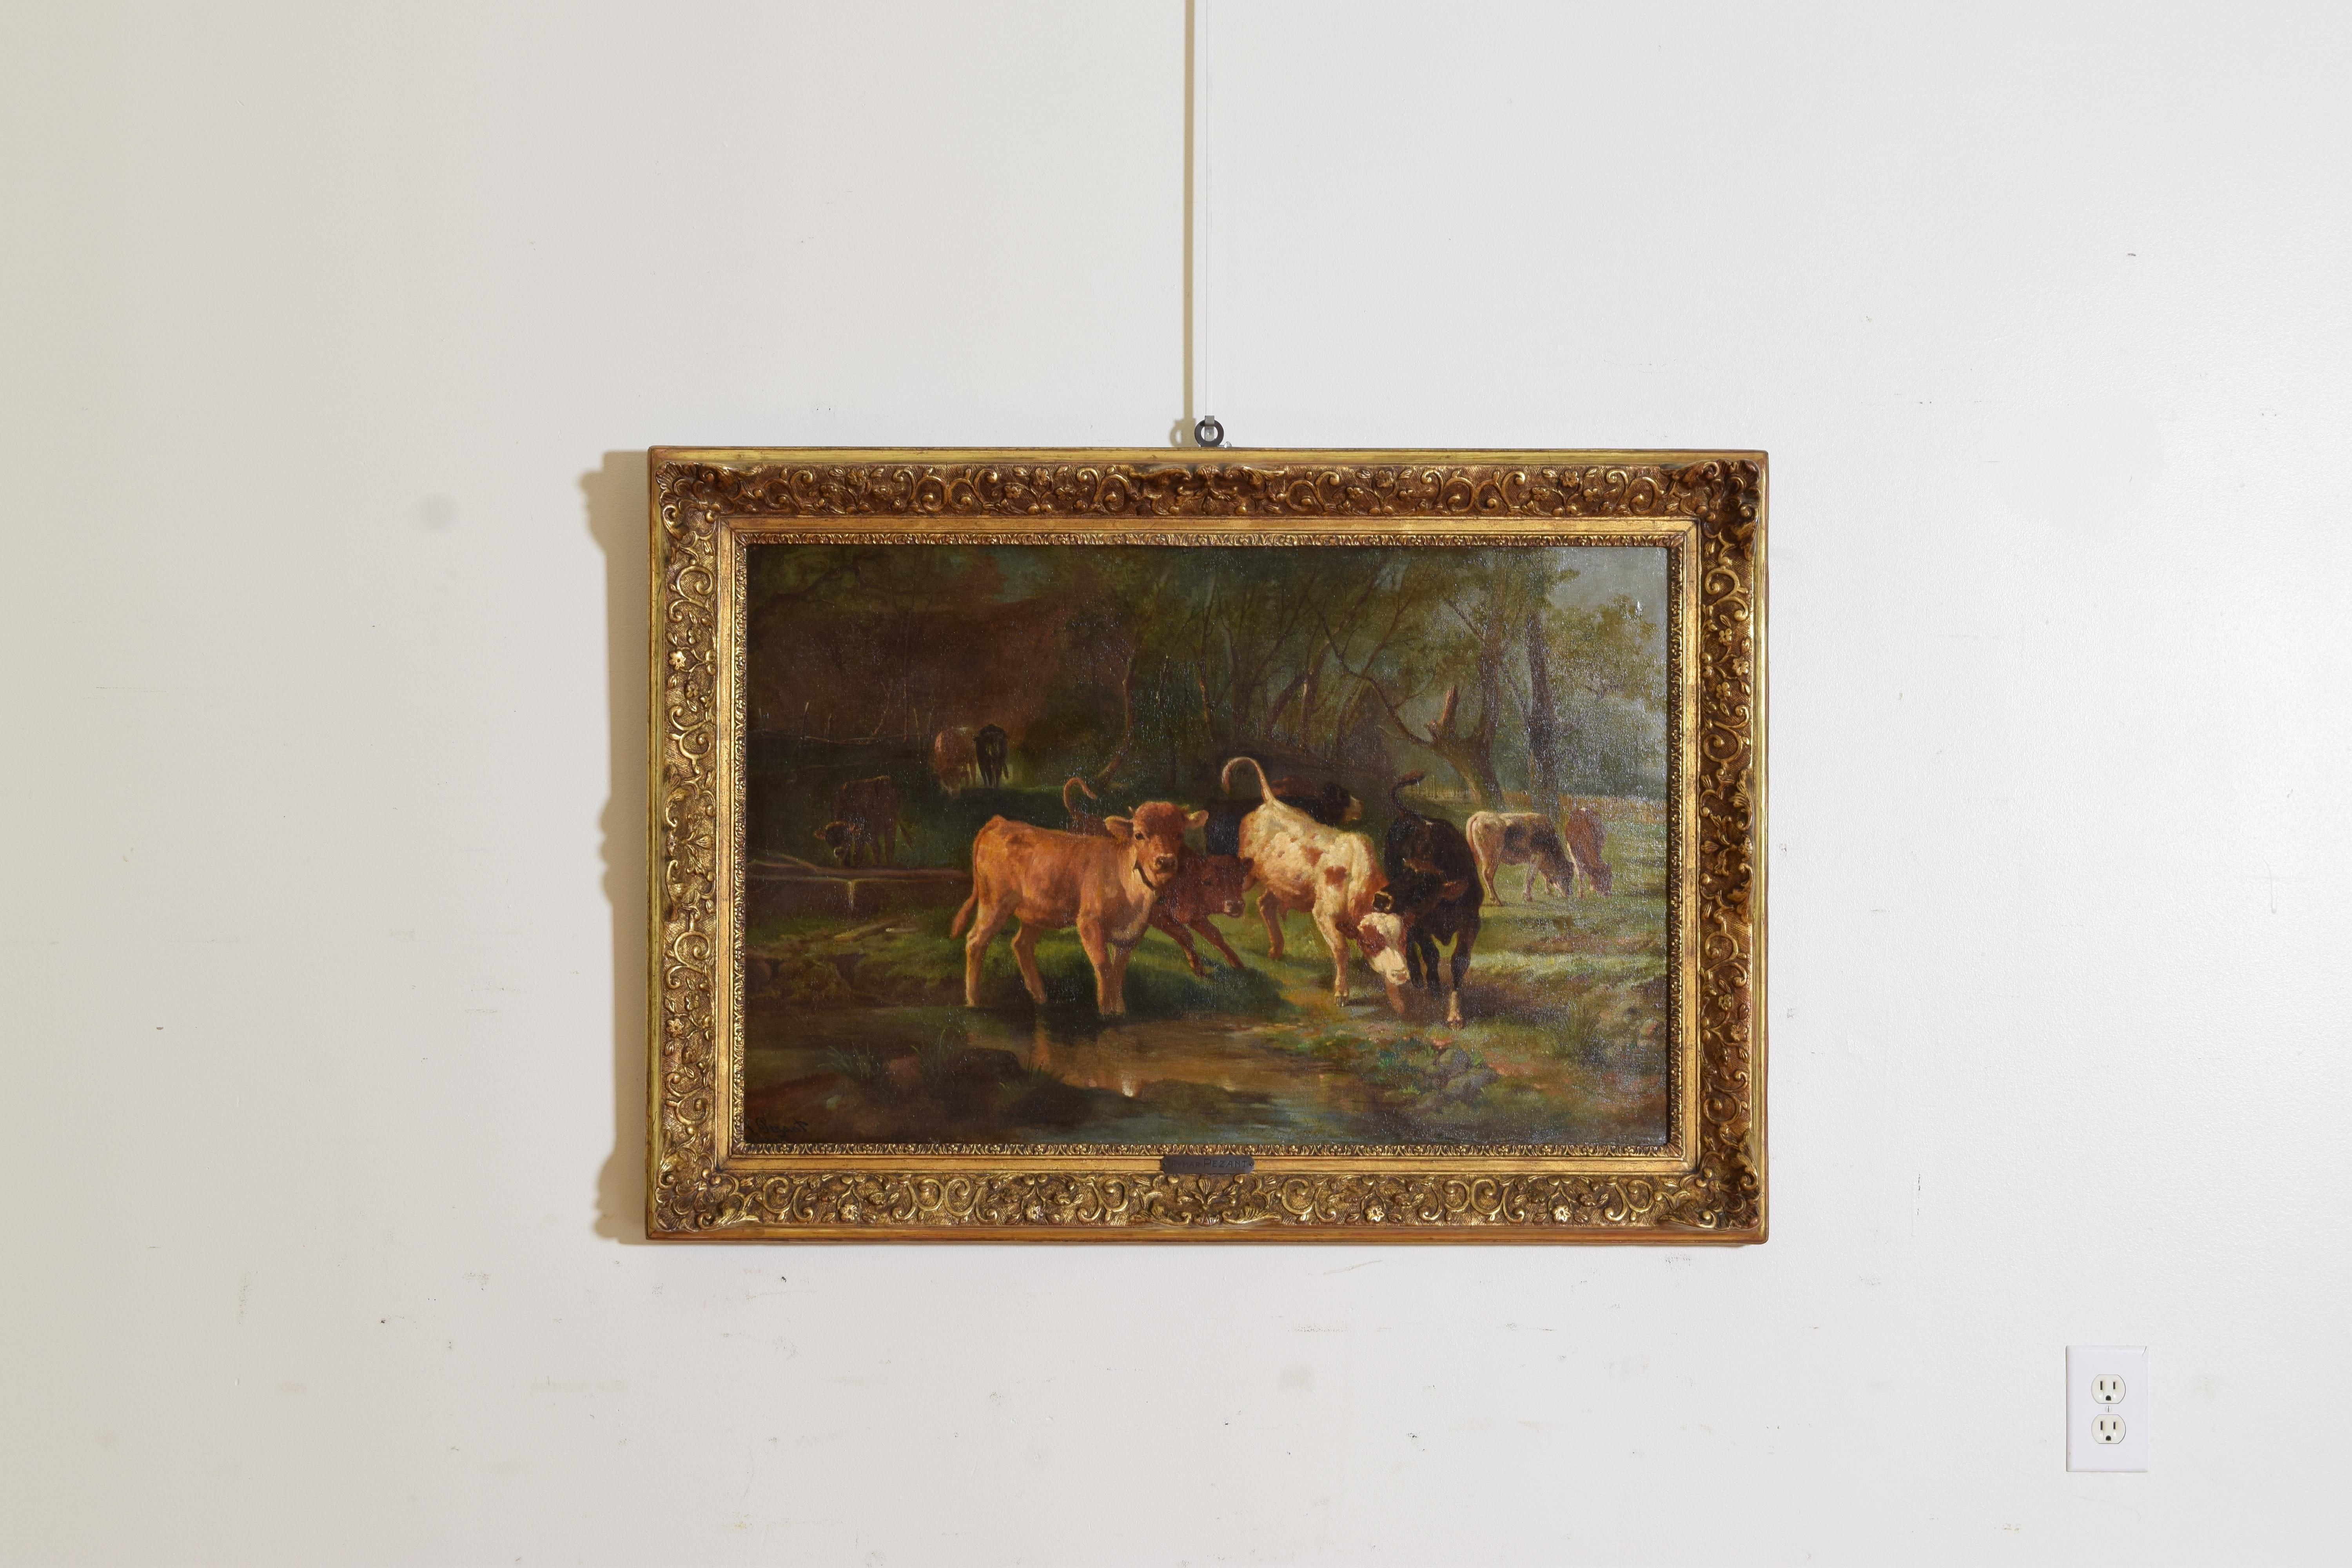 A scene of cows around a stream watering and at play surrounded by a low forest and meadows, the lead cow gazing directly at the viewer, in its original gilt-gesso frame complete with artist’s nameplate